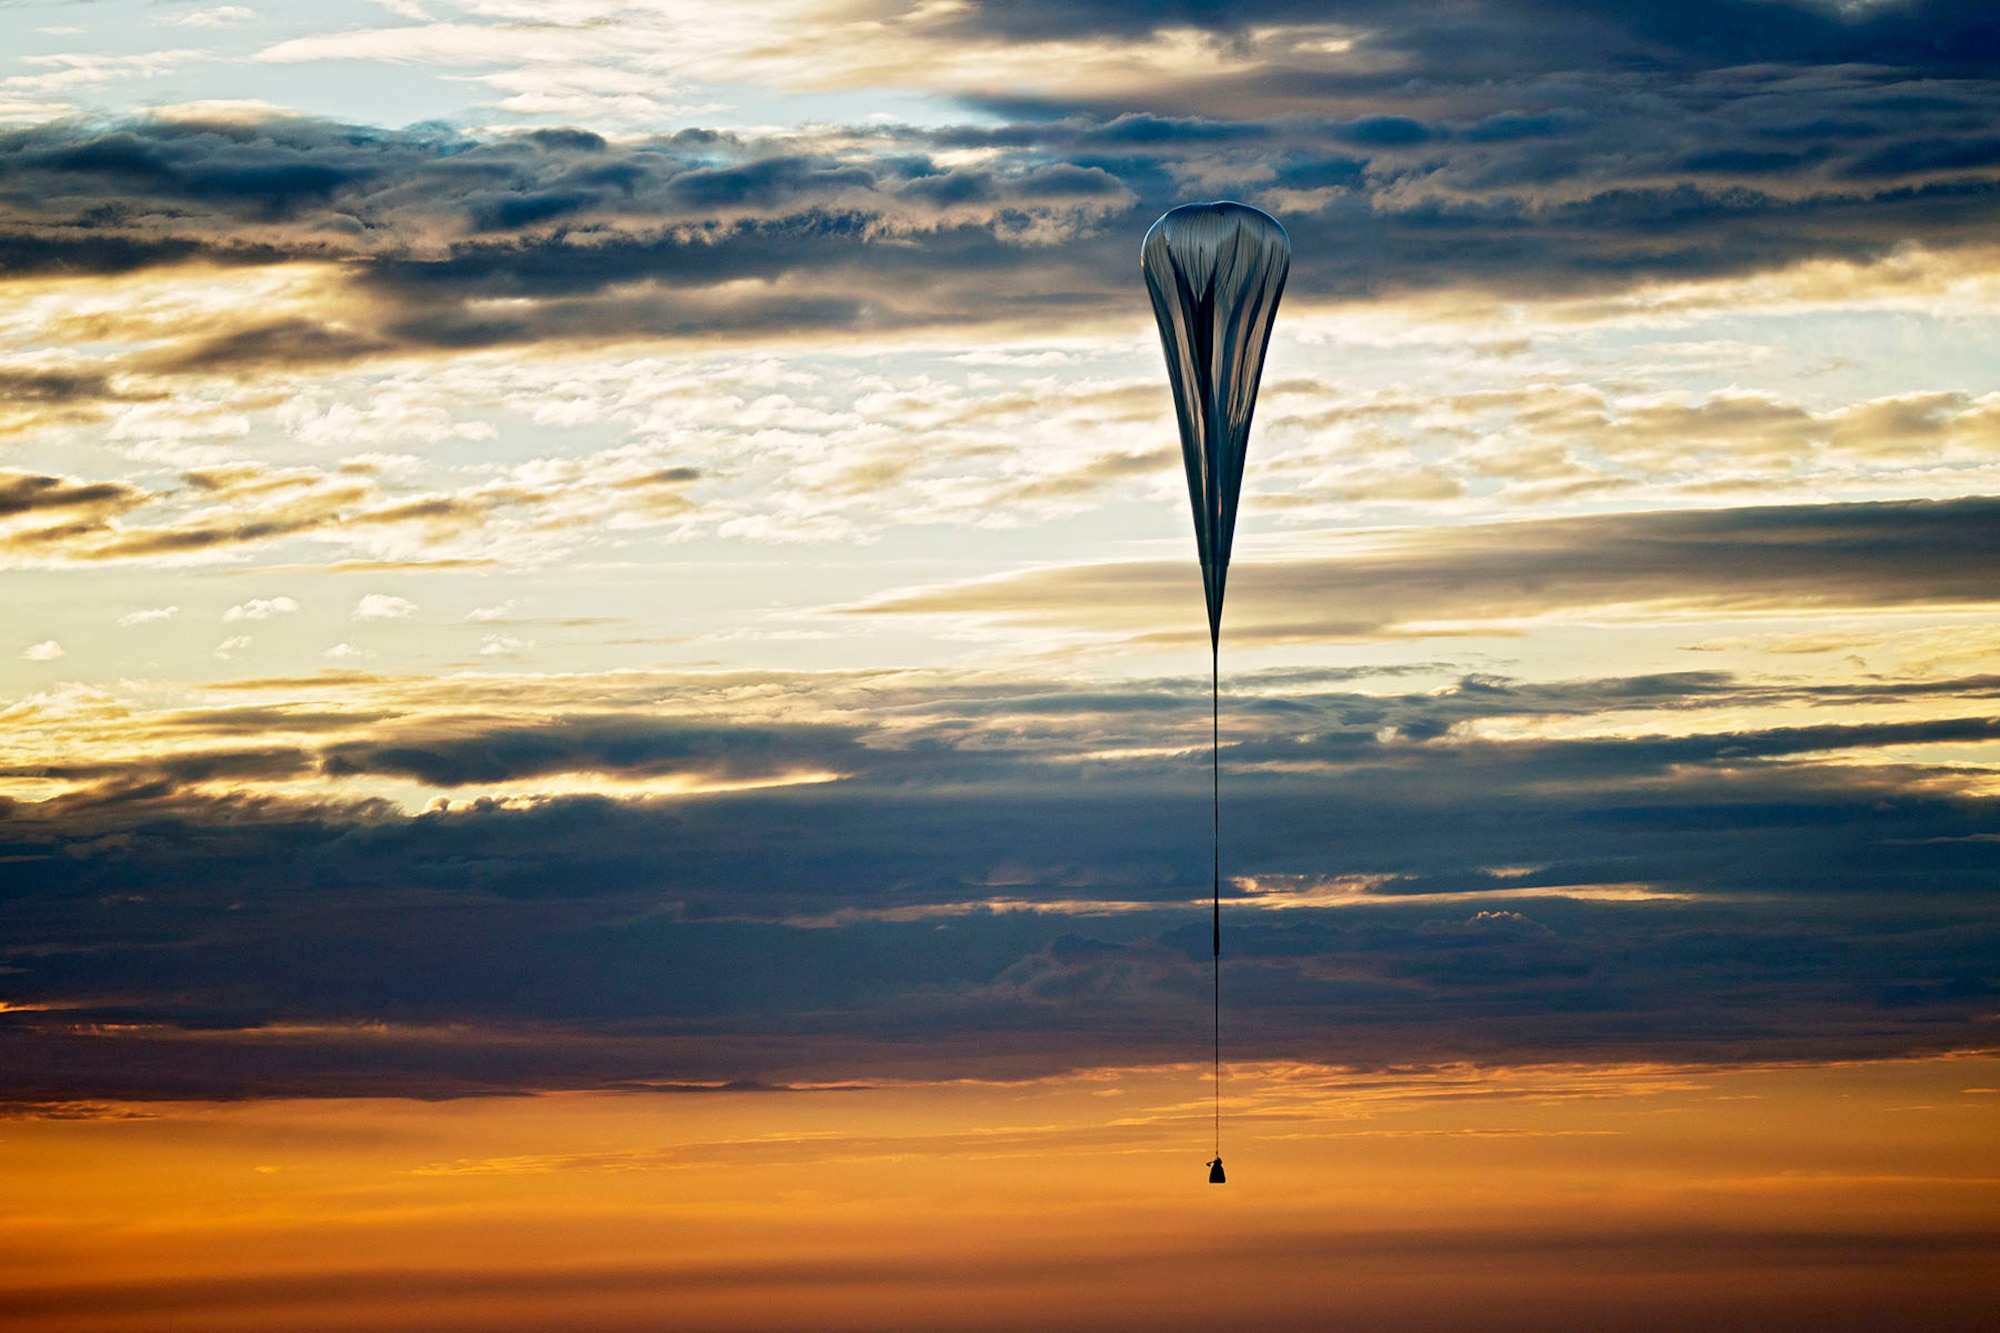 The balloon lifts up during the second manned test flight for Red Bull Stratos in Roswell, N.M., on July 25, 2012. Red Bull Stratos is a mission to the edge of space to an altitude of 37.000 meters to break several records, including the sound of speed in freefall. The Red Bull Stratos exhibit will be on display at the National Museum of the U.S. Air Force from Jan. 24-March 16, 2014. (Photo courtesy of Red Bull Stratos)